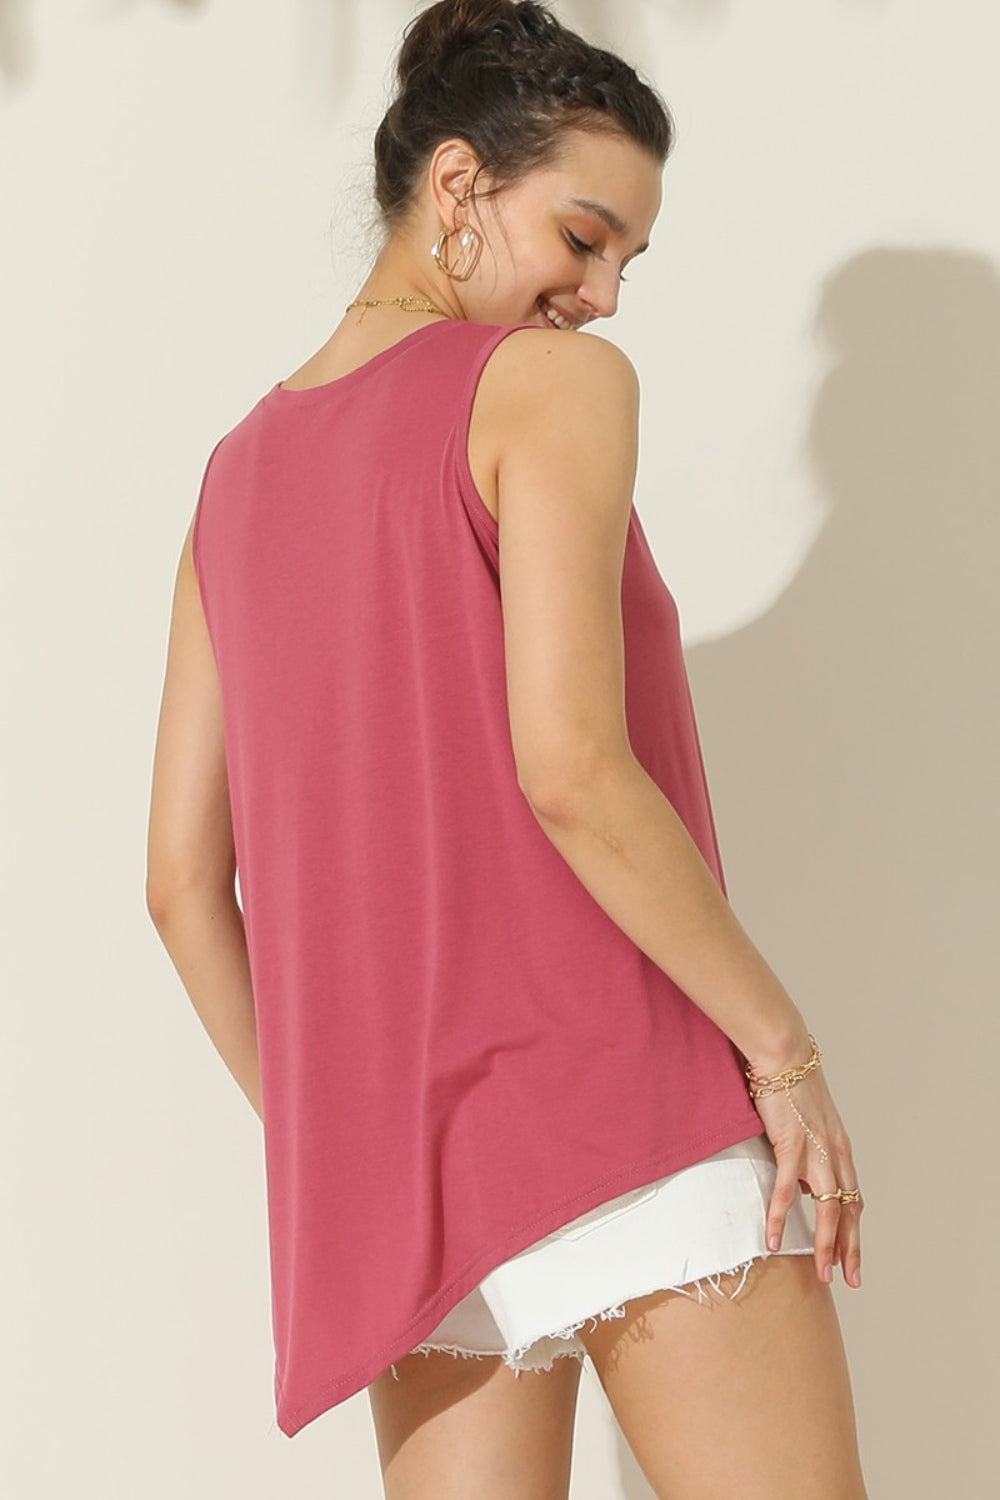 The Buttoned Uneven Hem Tank is a stylish and contemporary addition to your summer wardrobe. With its button-front design and uneven hemline, this tank top offers a unique and trendy look. The button detailing adds a touch of sophistication, while the uneven hemline adds an element of asymmetry and visual interest.  S  - XL